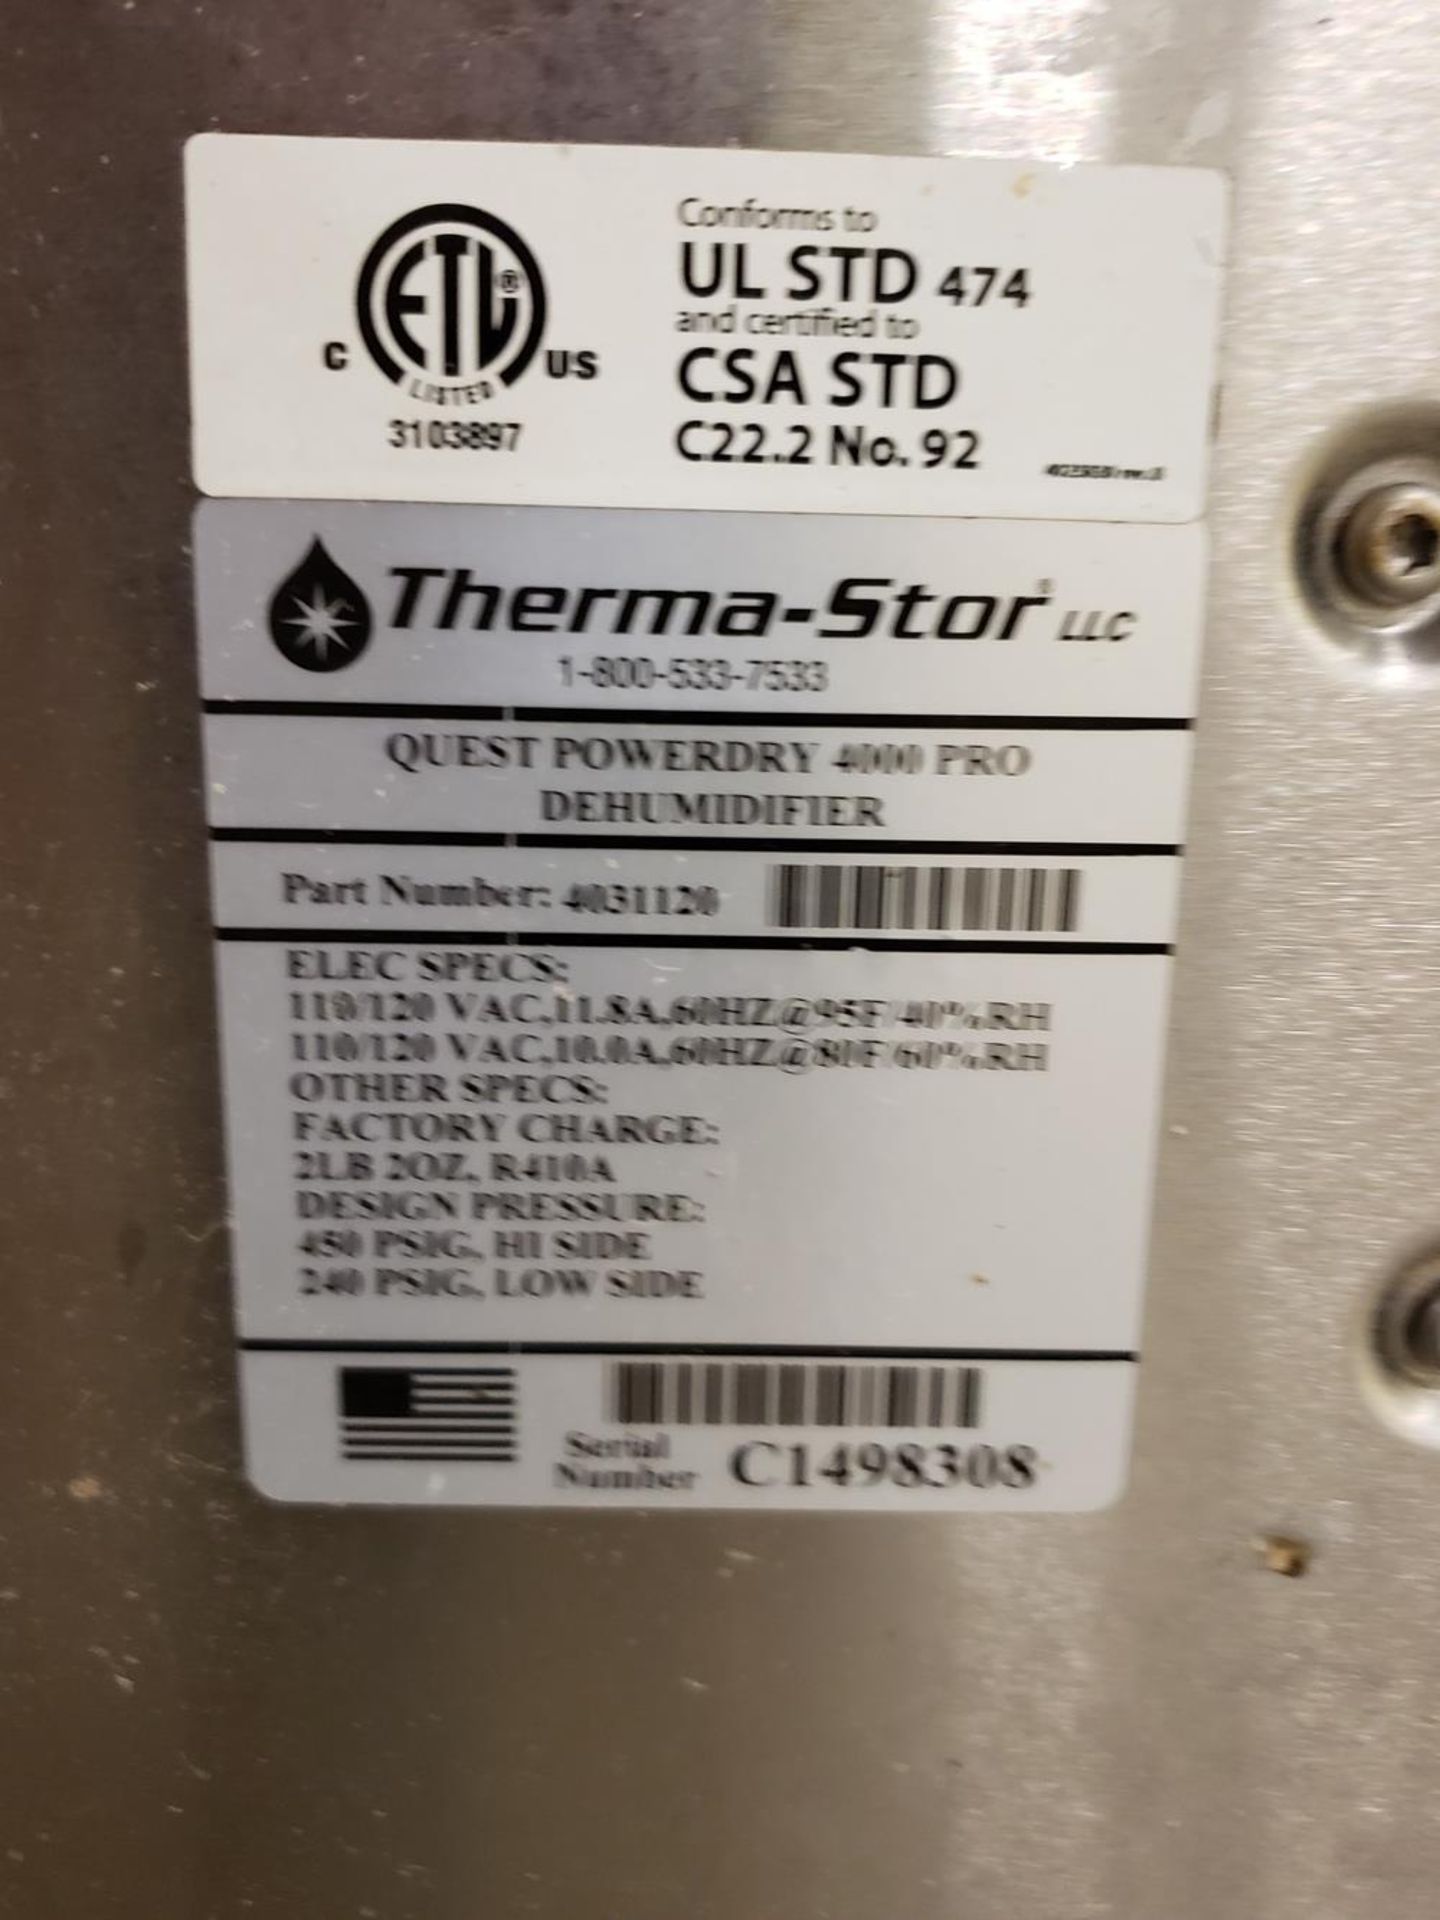 Therma-Stor Quest Powerdry 4000 Pro Dehumidifier, S/N C1498308 | Rig Fee: $20 - Image 2 of 2